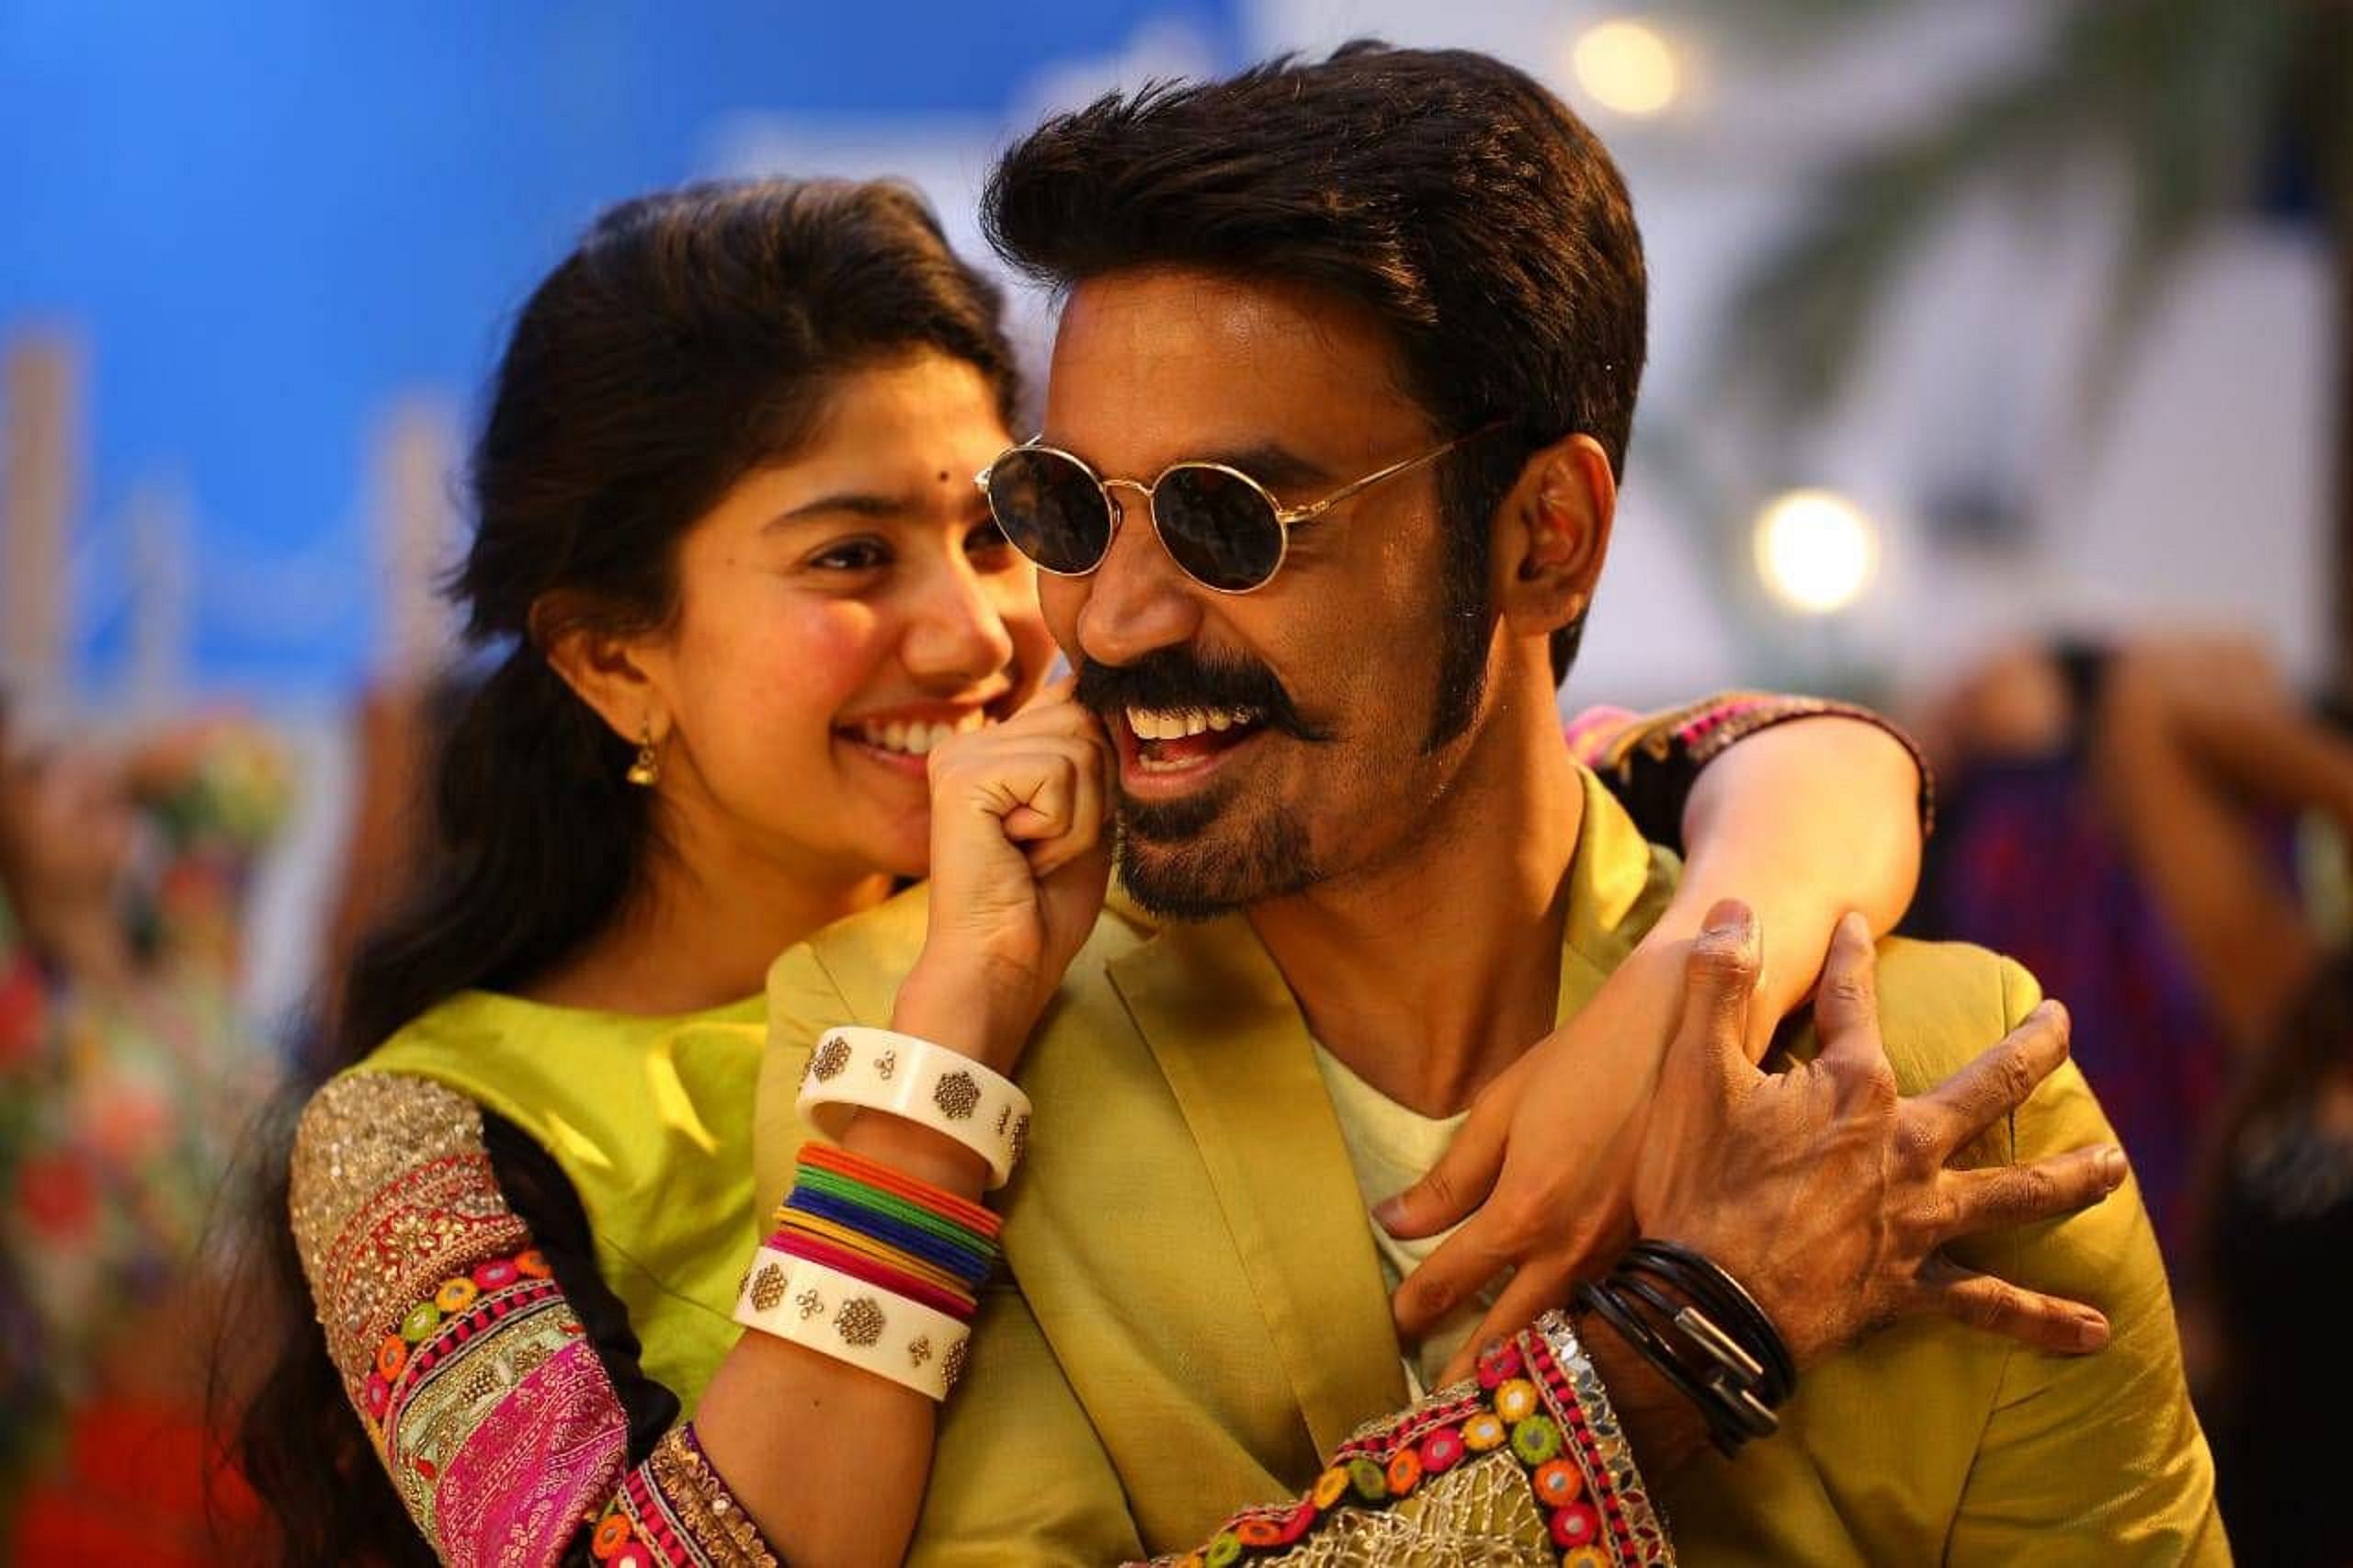 The song 'Rowdy Baby' from the Tamil film 'Maari 2' is the top trending music video on YouTube in India.